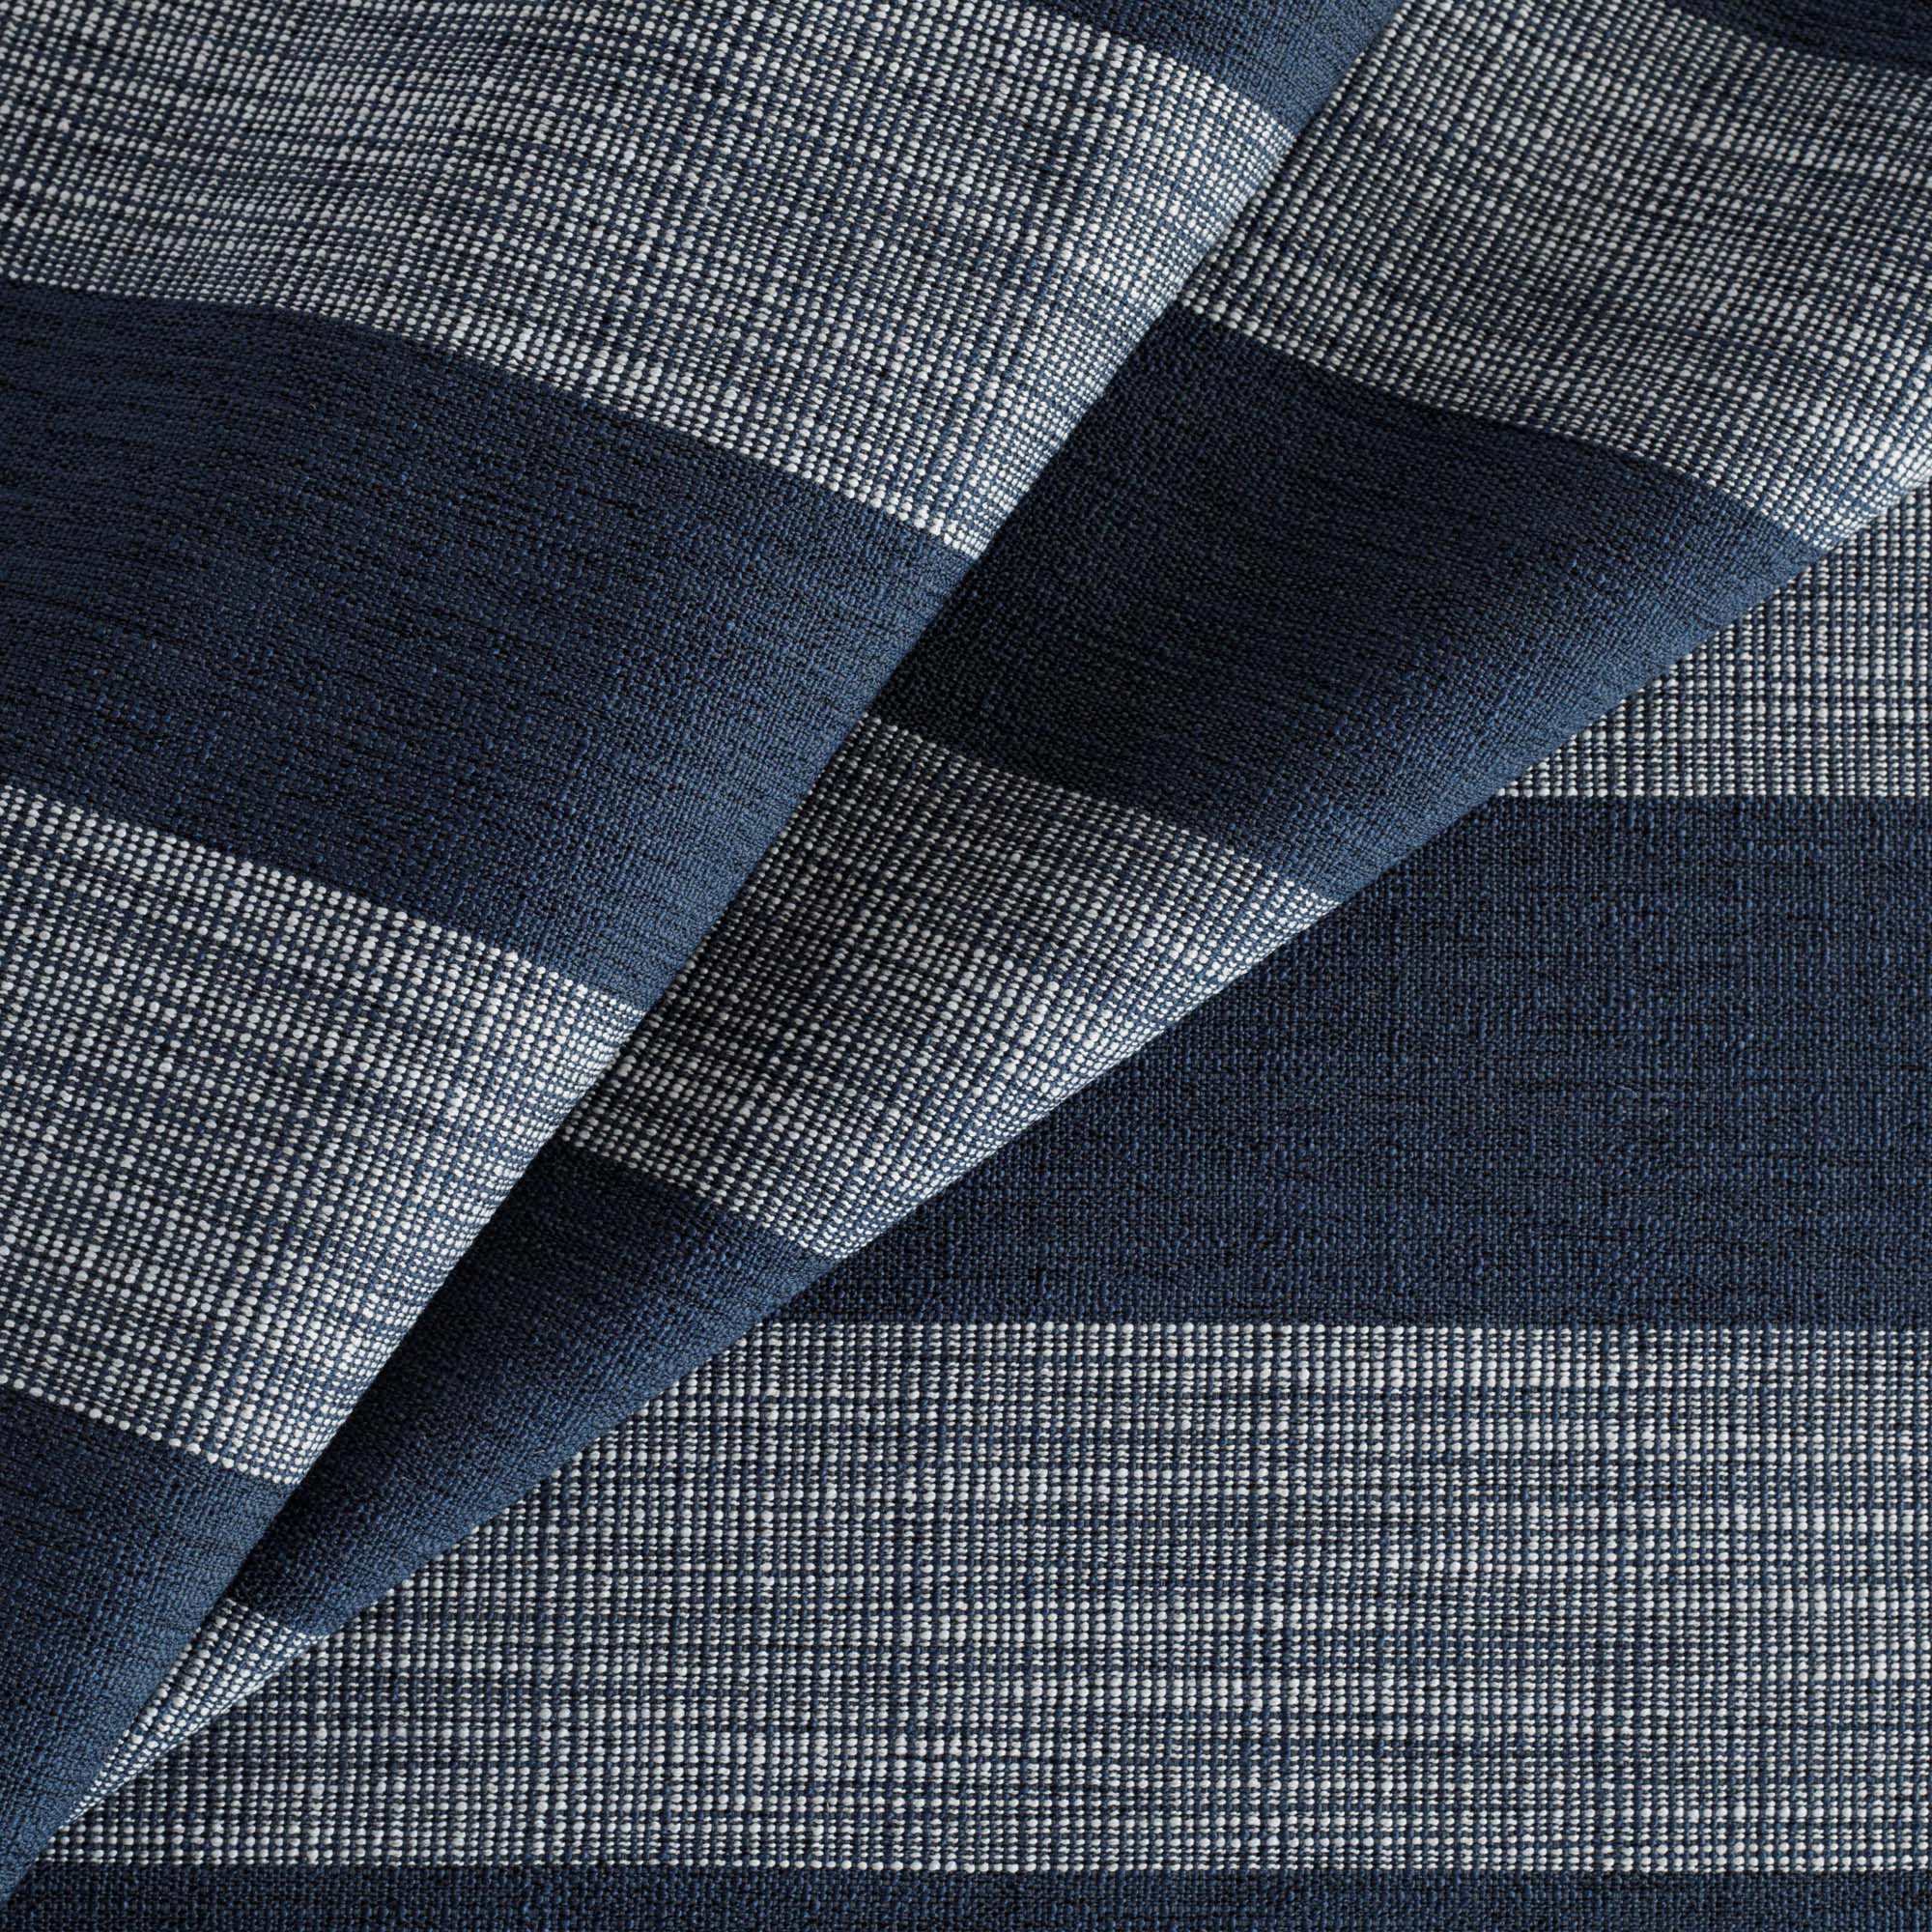 a deep navy blue and white wide stripe tonic living upholstery fabric